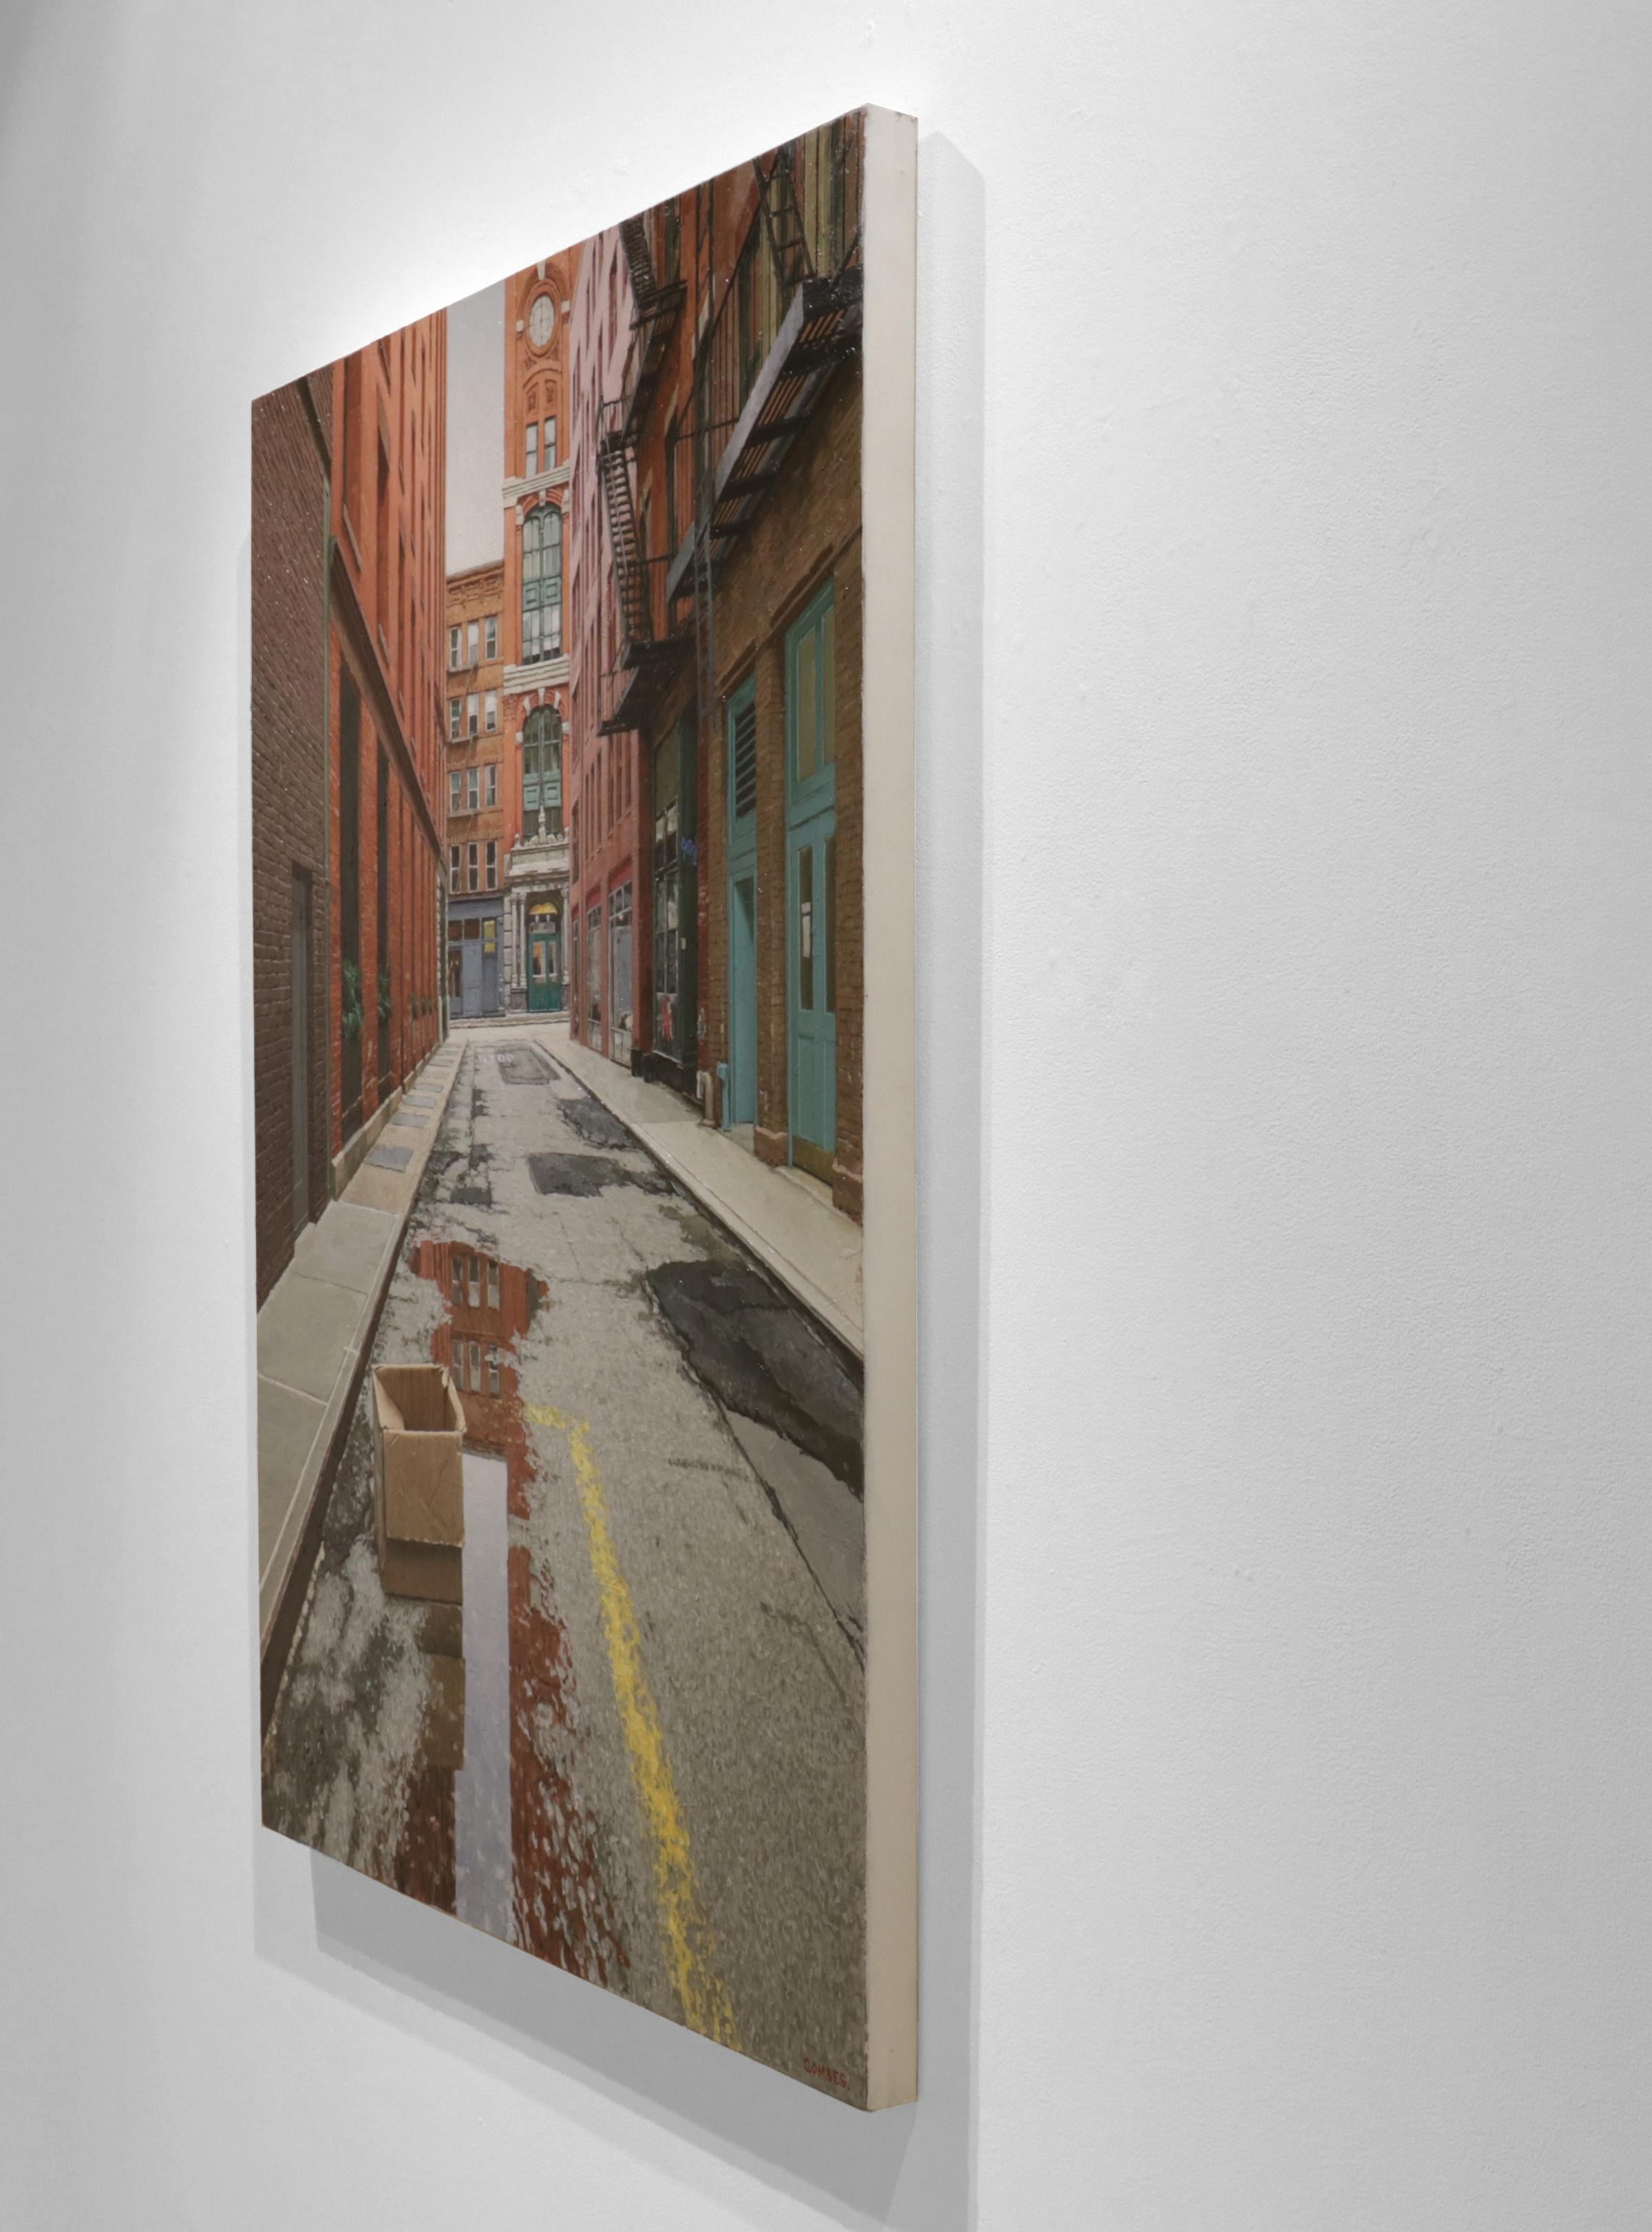 EARLY MORNING IN THE CITY, New York City, Puddle, Tribeca, Cobblestone, Old NY - Gray Landscape Painting by Richard Combes